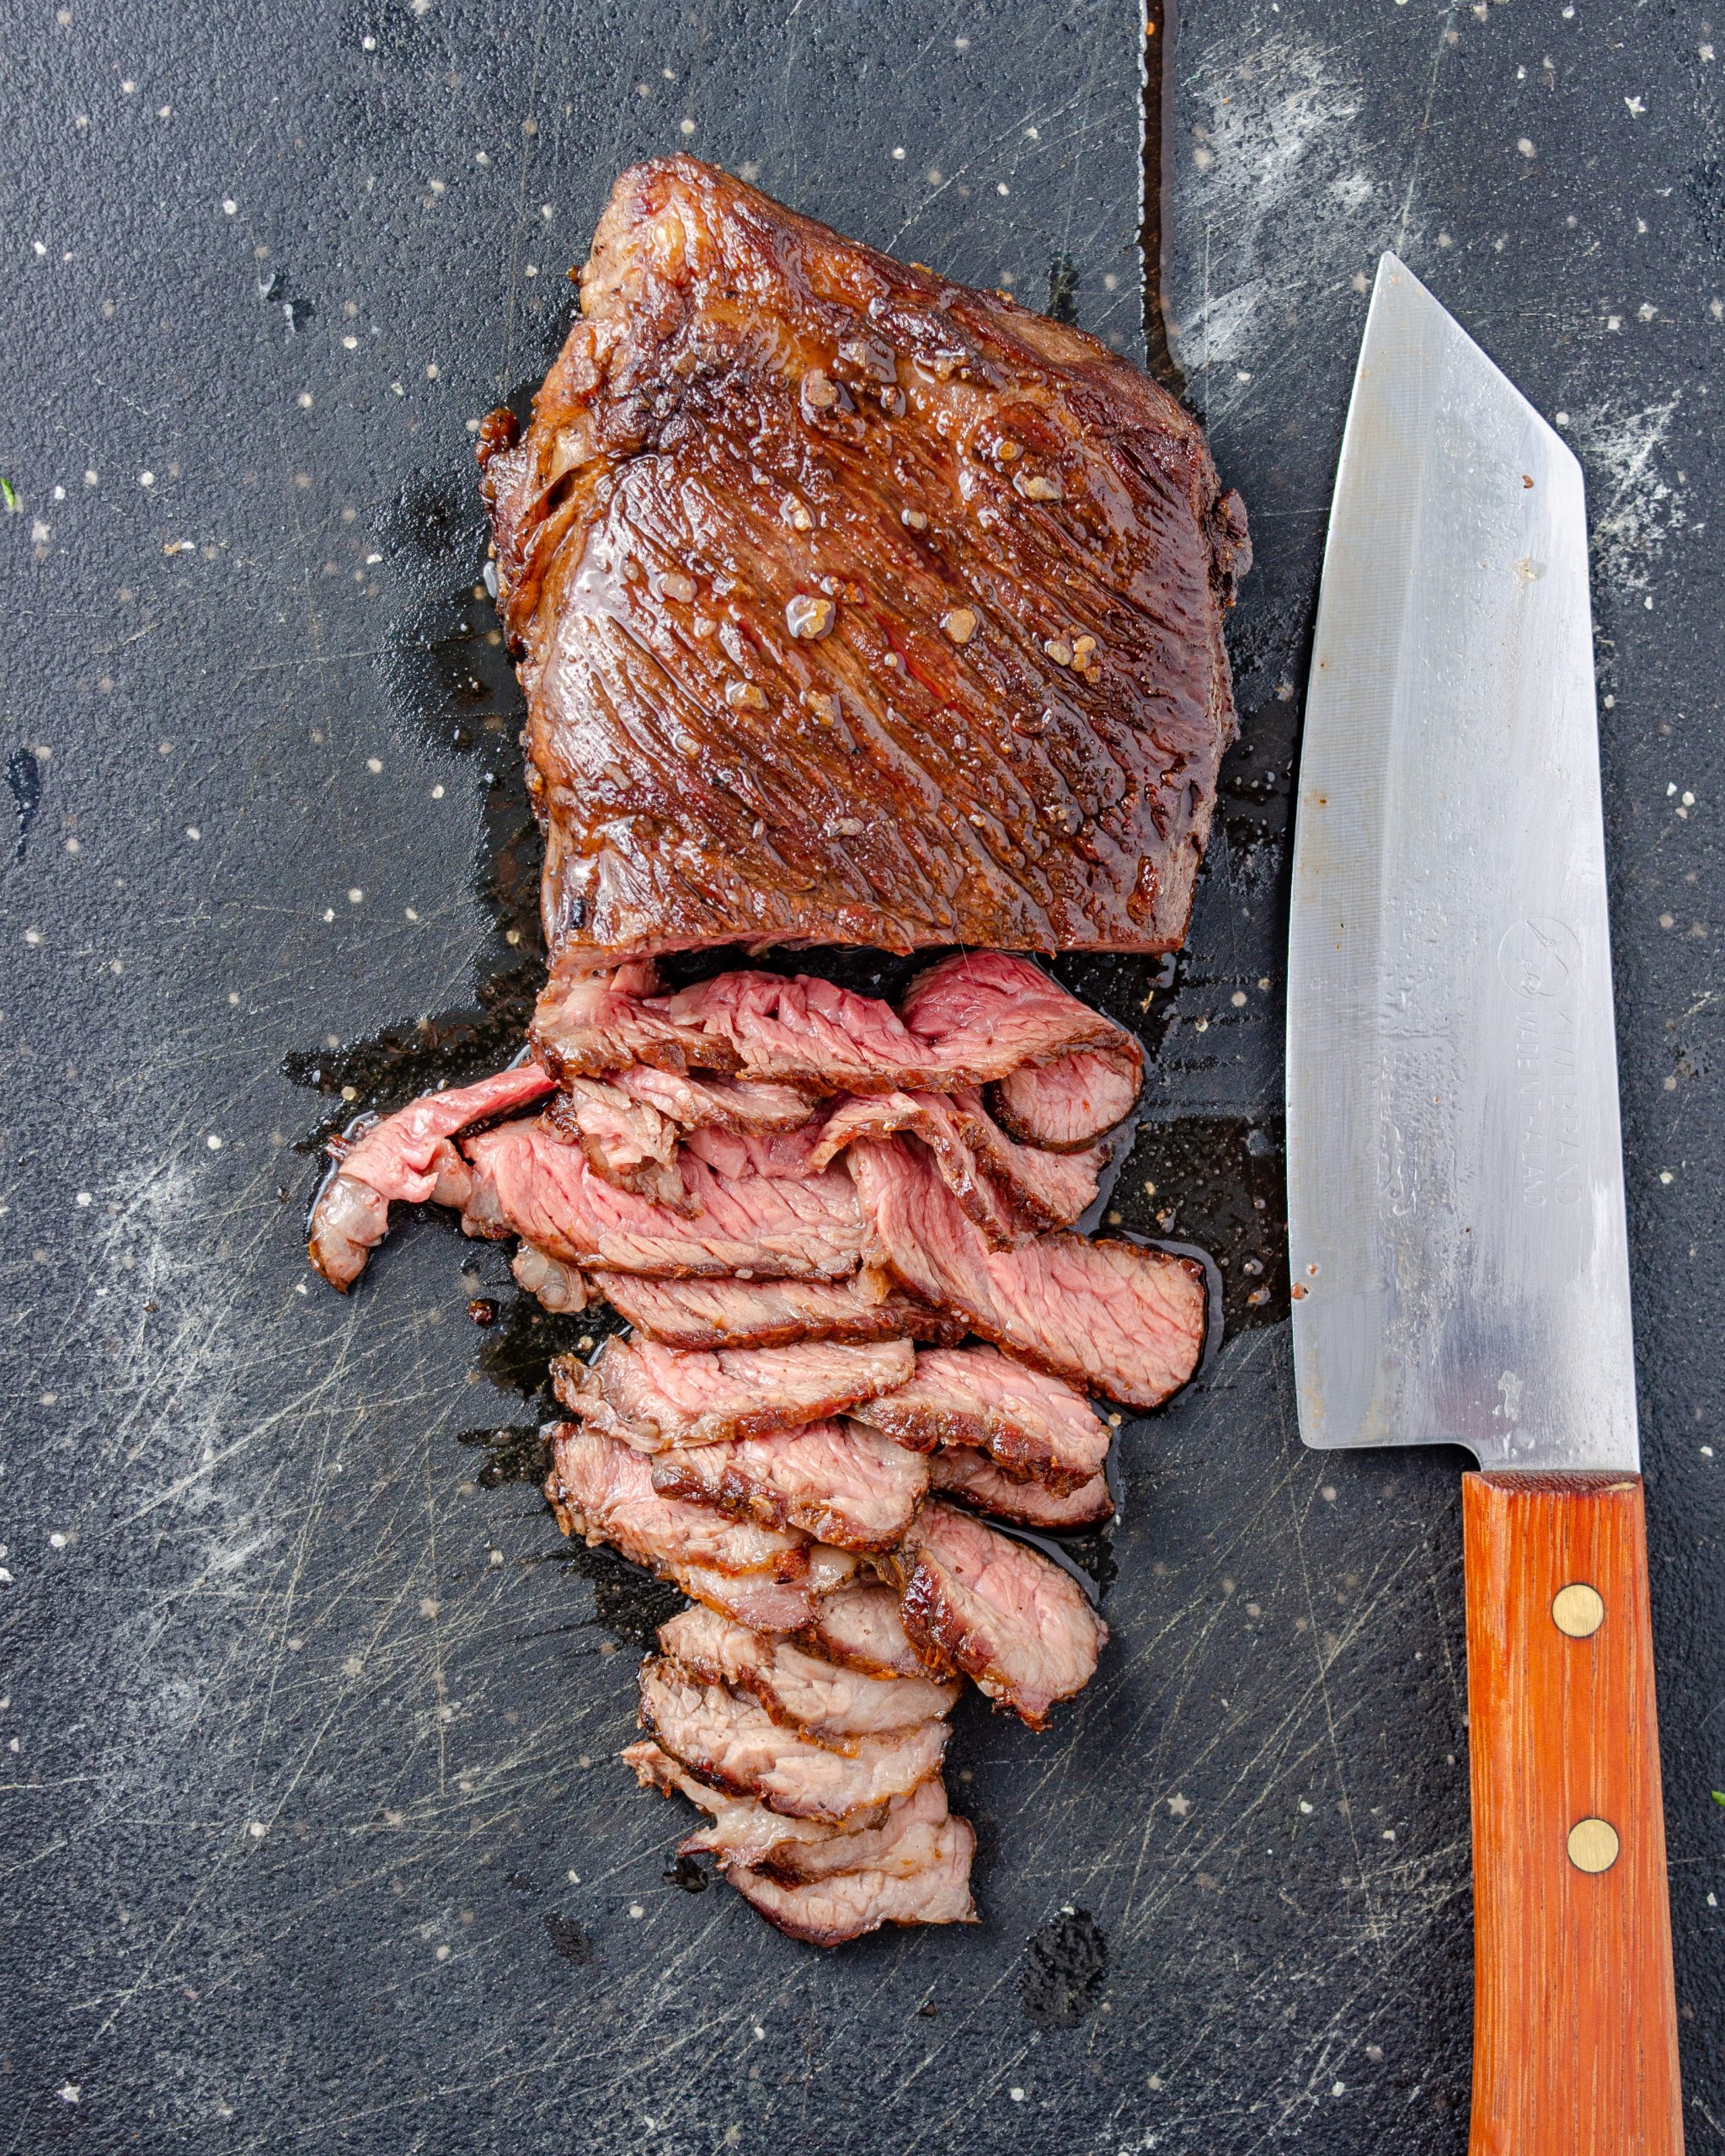 Remove the steak from the heat, let rest for 5 minutes, and slice very thinly. 